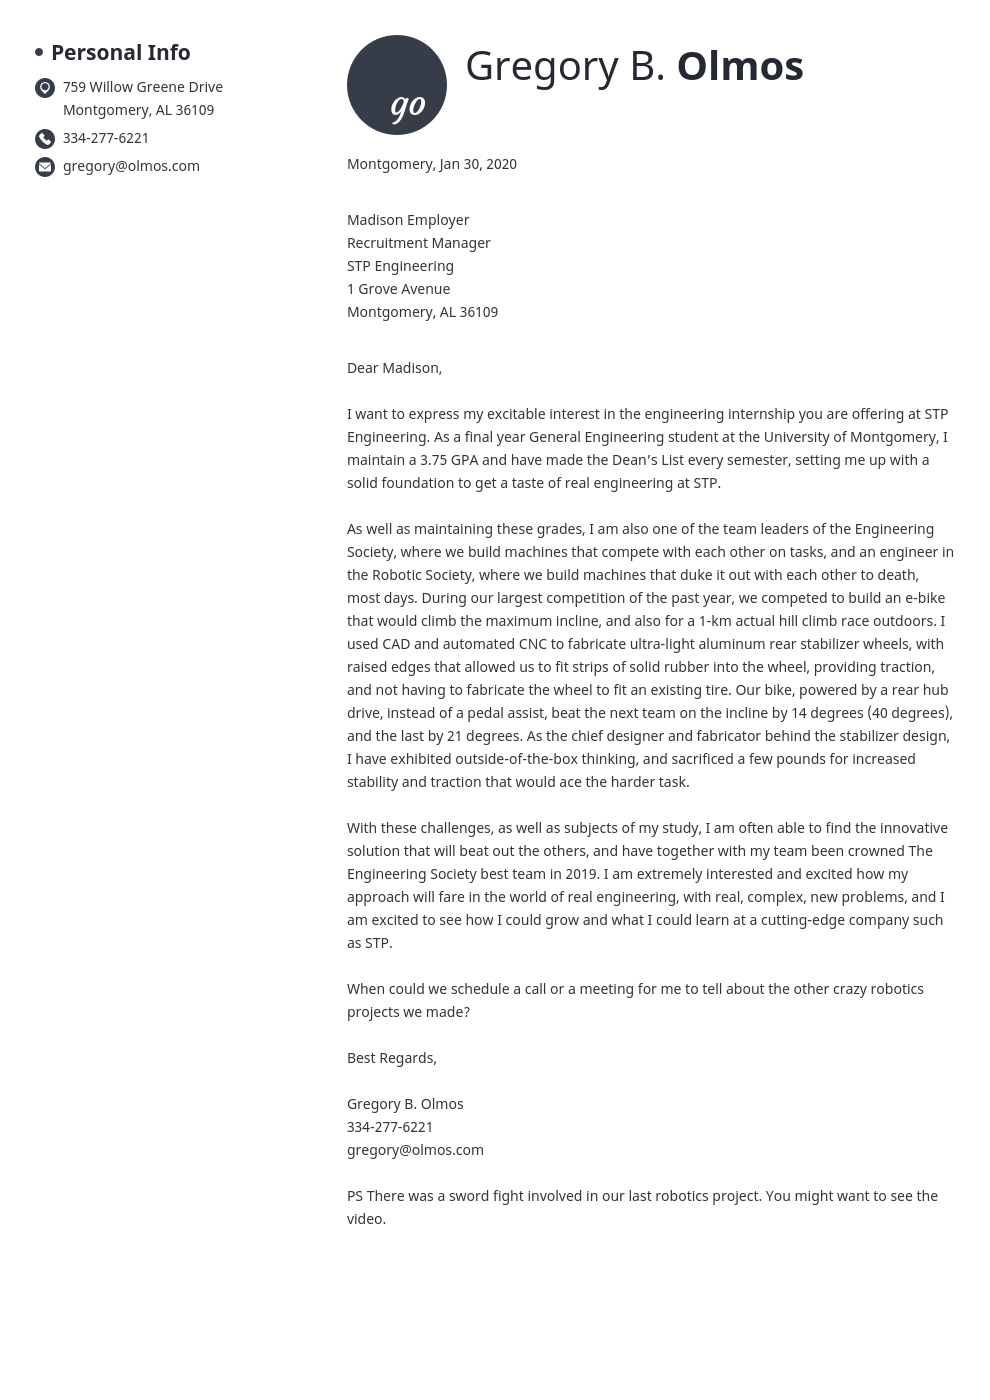 Engineering Internship Cover Letter: Sample & Template to Fill